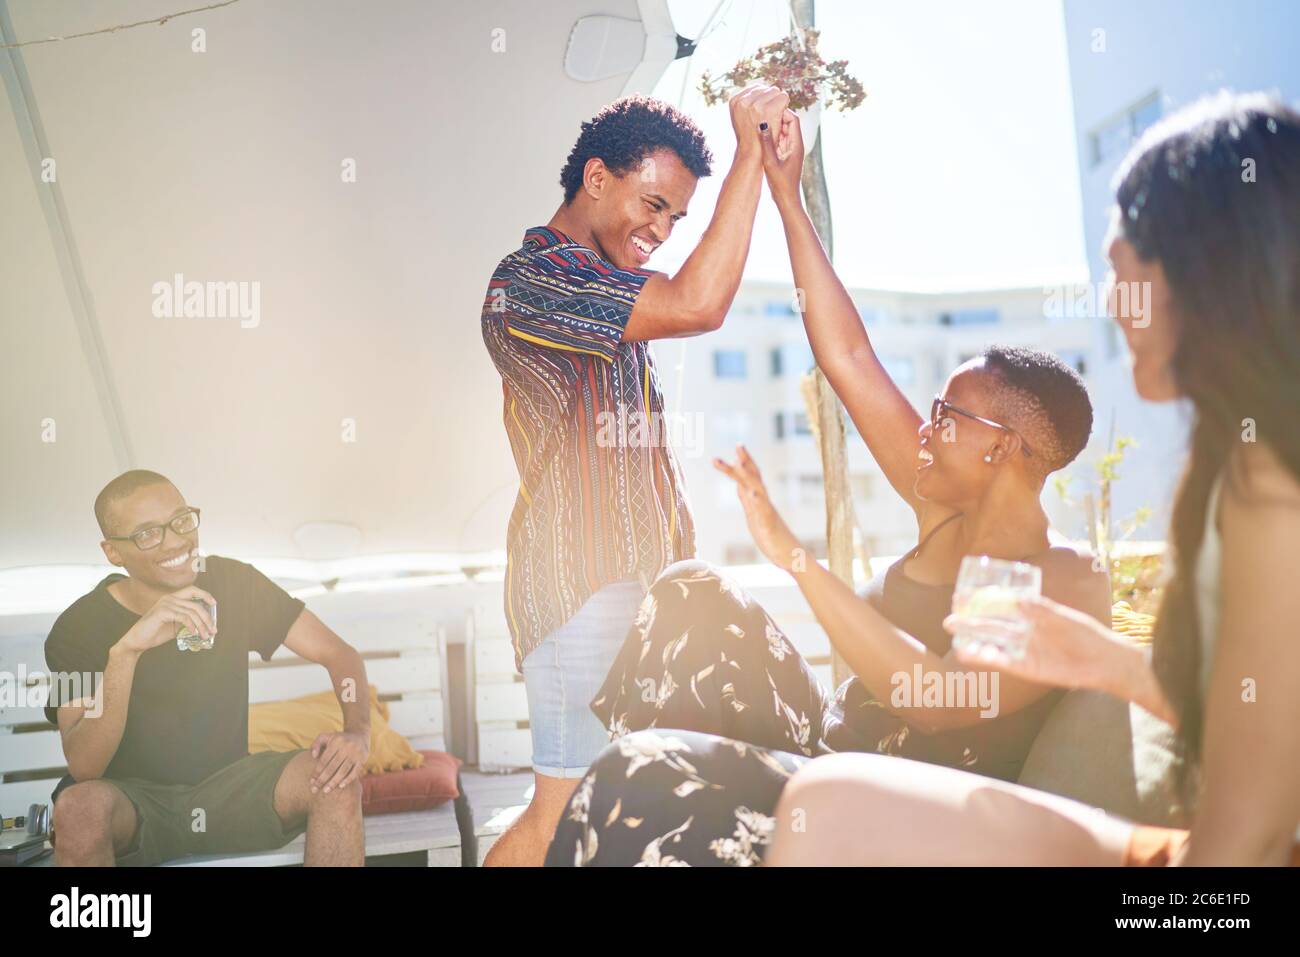 Happy young friends high fiving on sunny rooftop balcony Stock Photo